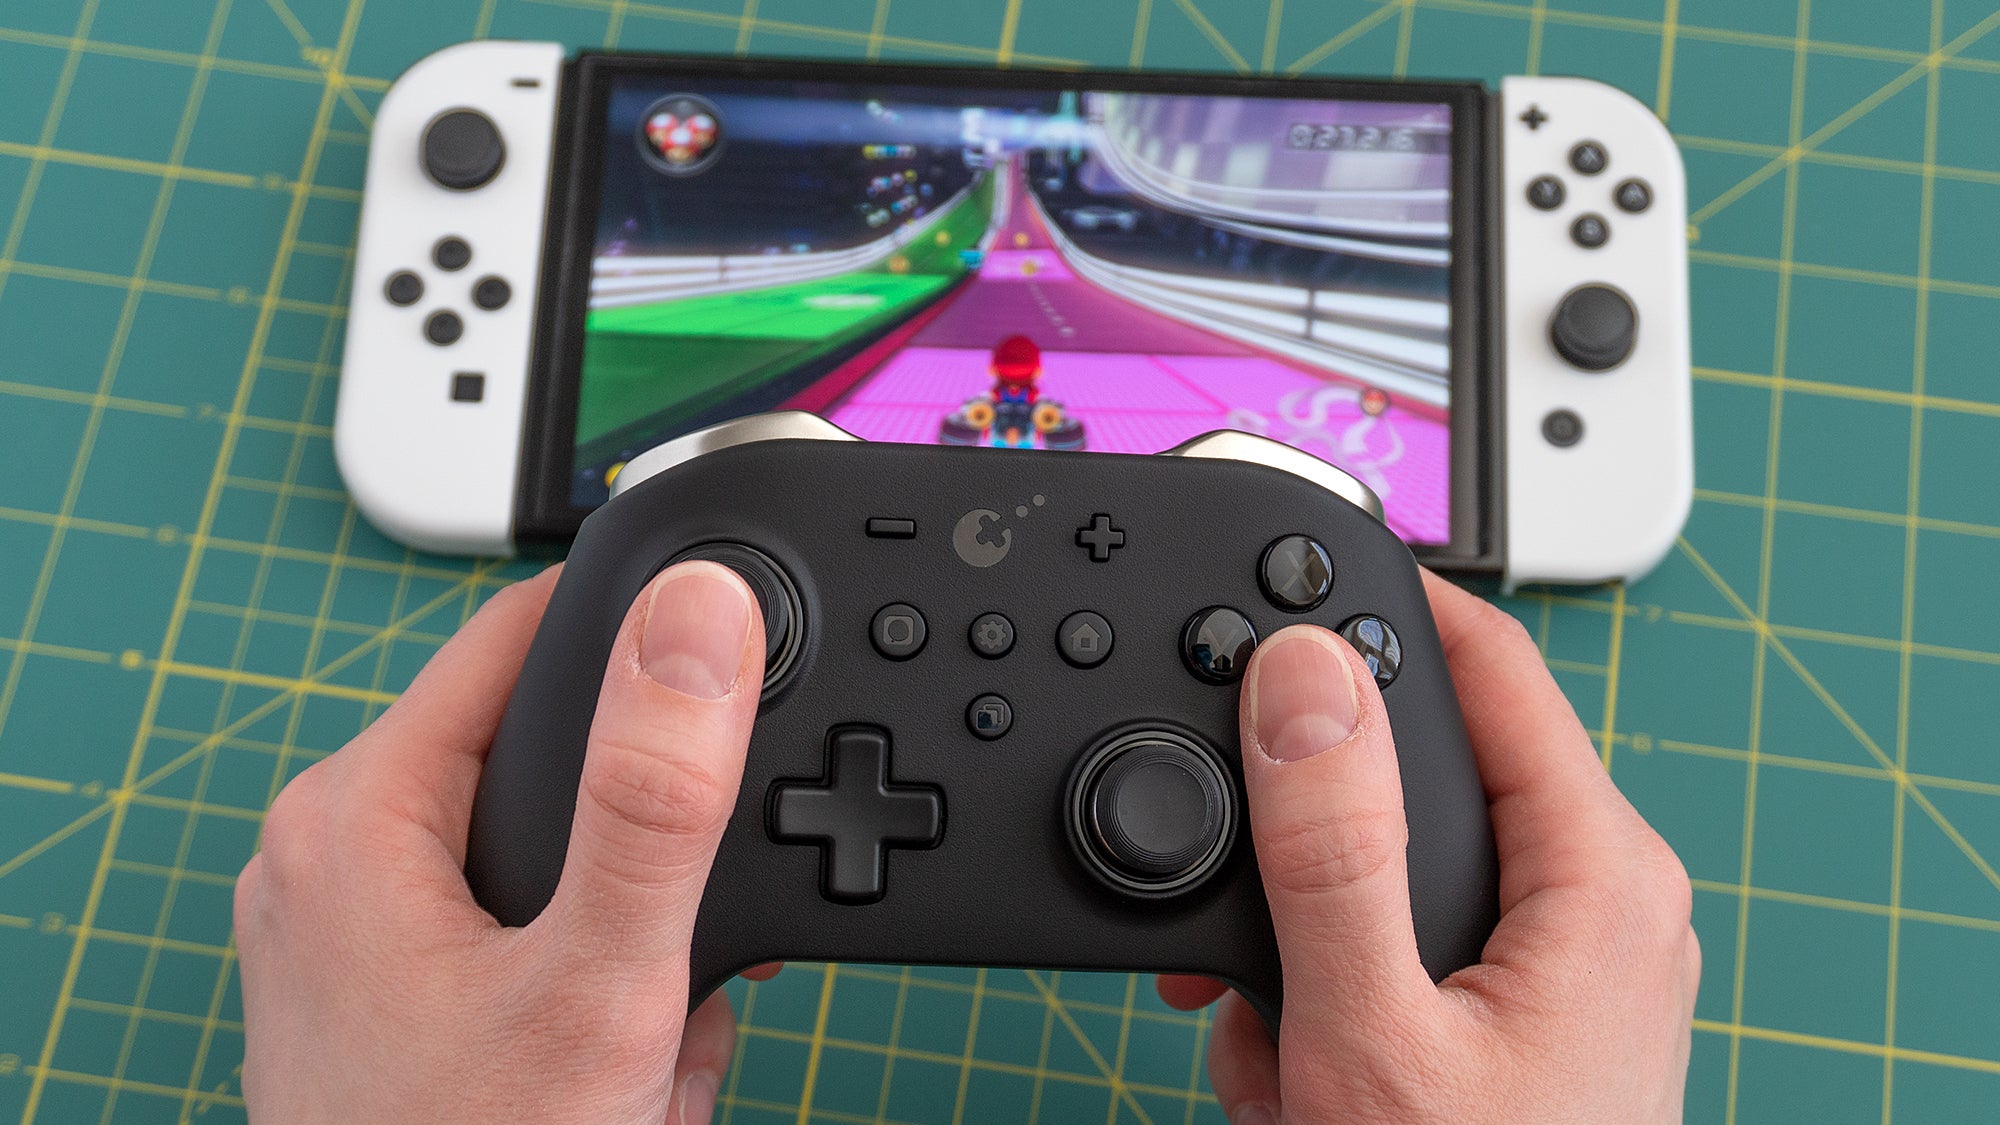 If you're looking for an alternate controller for the Nintendo Switch, the $US70 ($97) KingKong Pro 2 seems like the best option at the moment if you don't need to do any complicated button remapping. (Photo: Andrew Liszewski - Gizmodo)